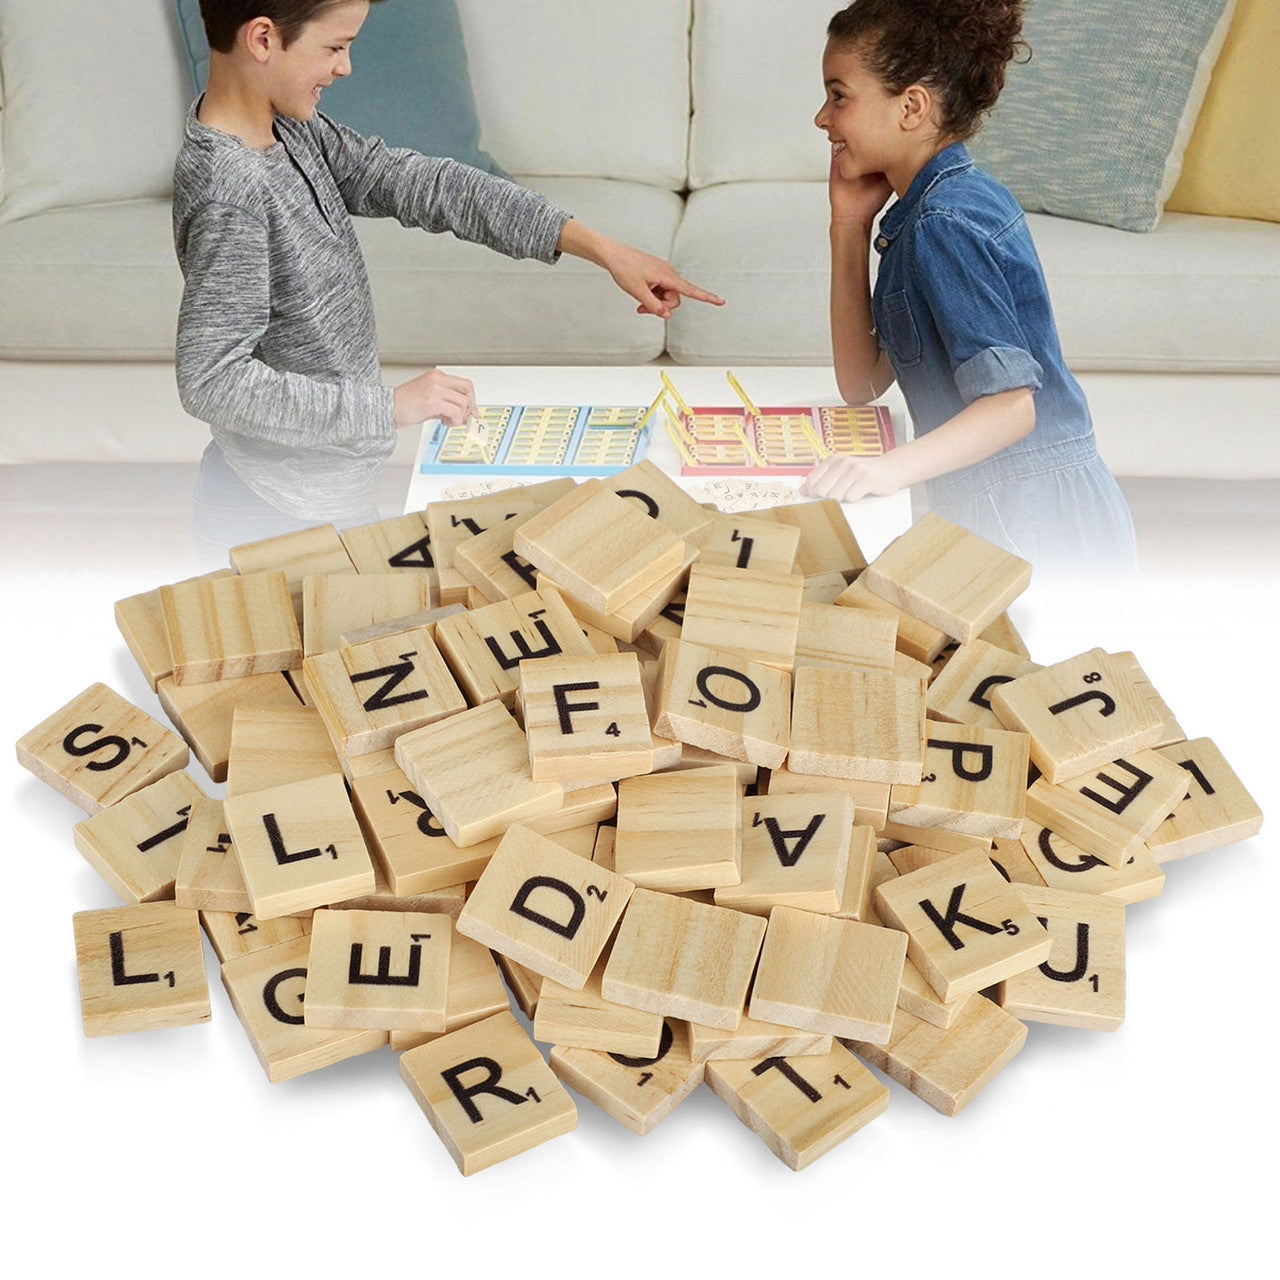 Wood Letter Tiles, Scrabble Letters for Crafts, A-Z Capital Letters for Crafts Spelling, DIY Wood Gift Decoration, Making Alphabet Coasters and Scrabble Crossword Game, 4Pcs